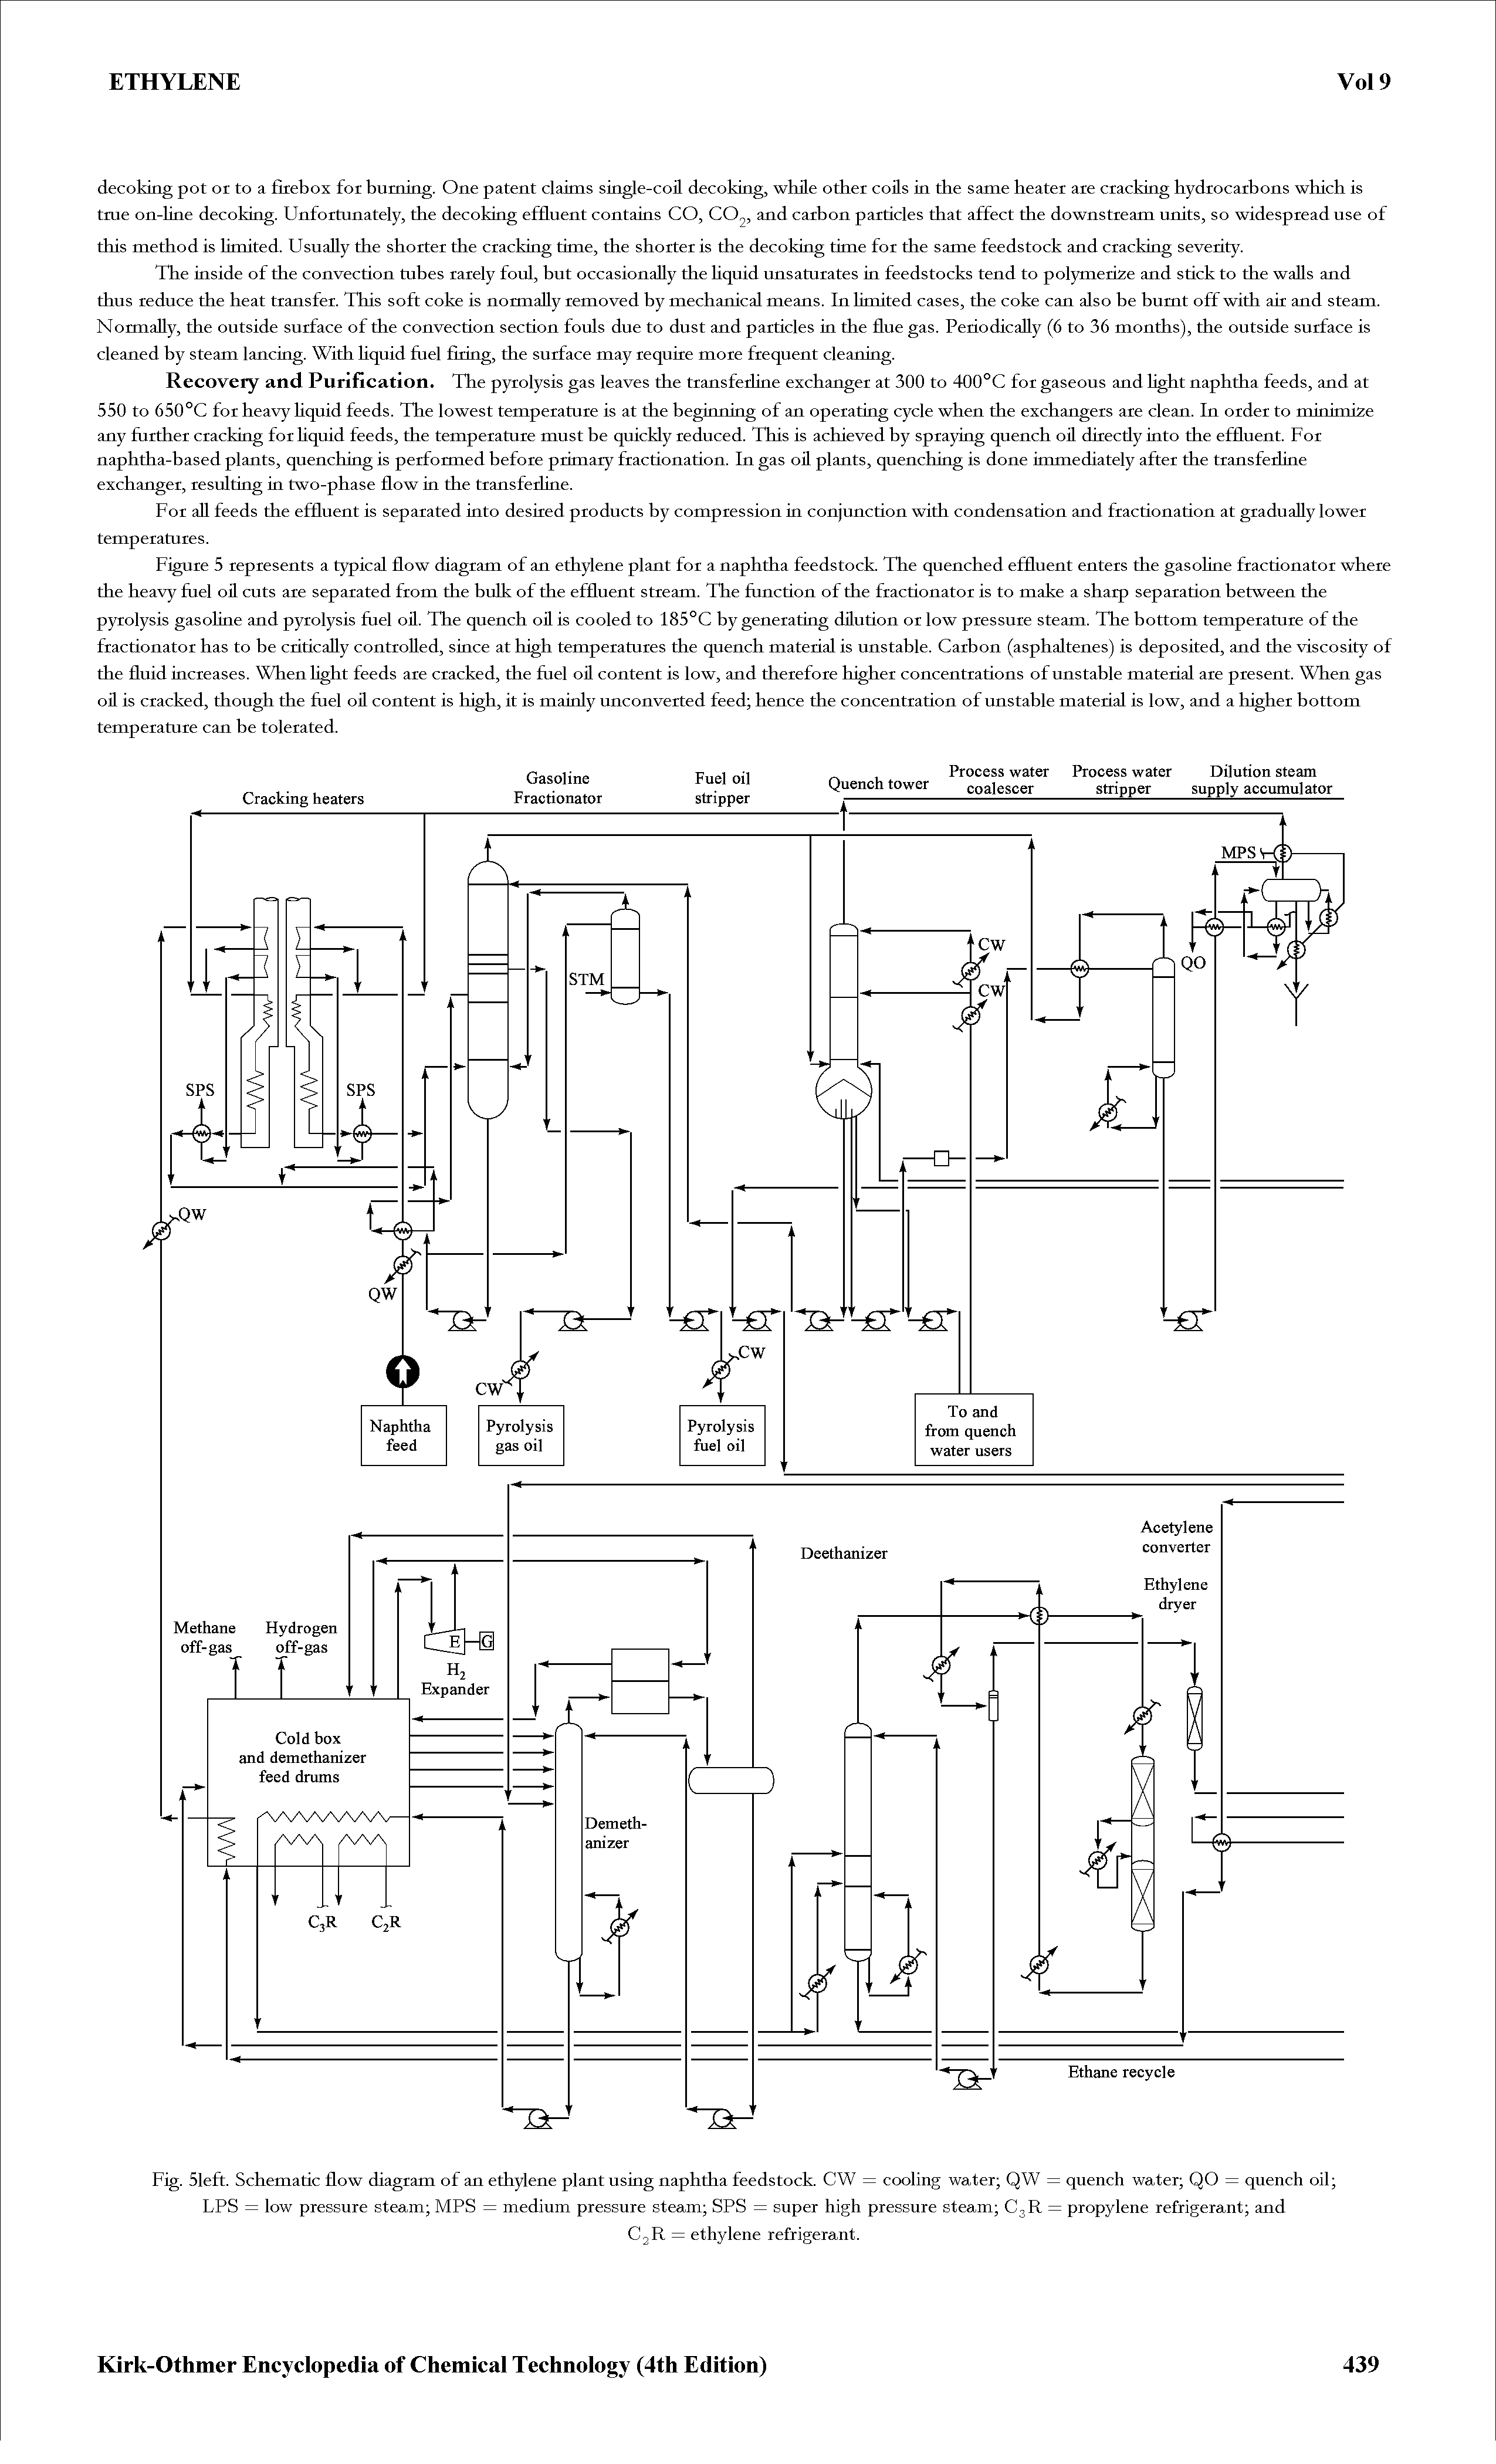 Fig. 51eft. Schematic flow diagram of an ethylene plant using naphtha feedstock. CW = cooling water QW = quench water QO = quench oil LPS = low pressure steam MPS = medium pressure steam SPS = super high pressure steam C3R = propylene refrigerant and...